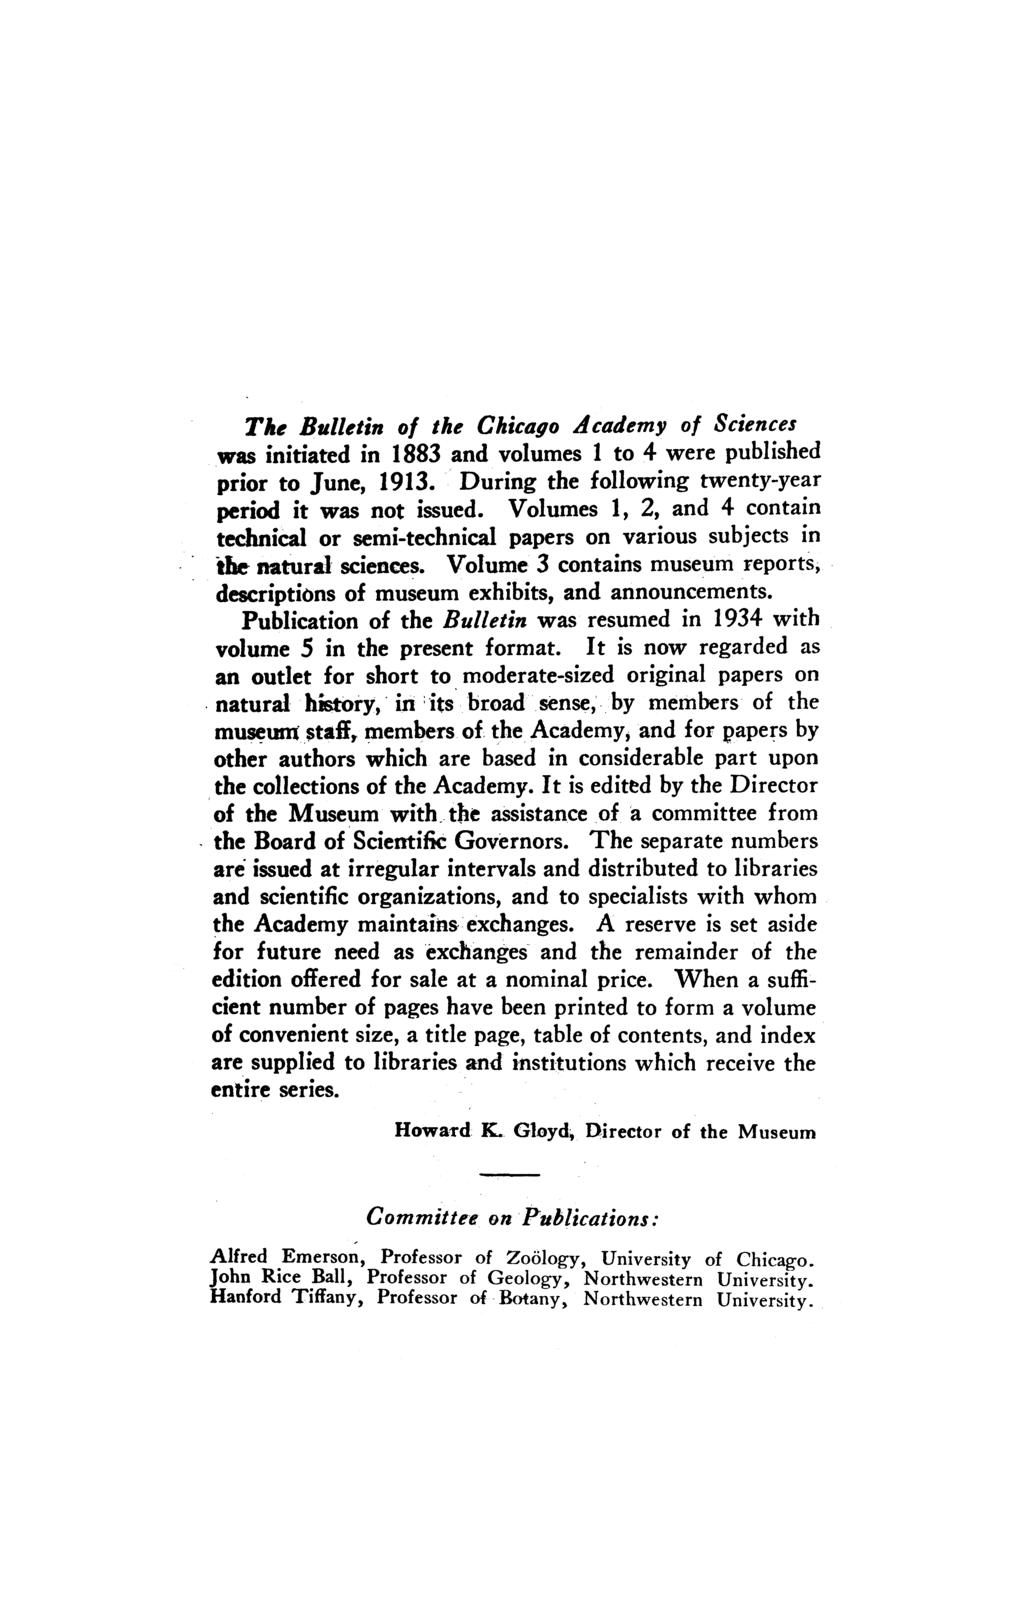 The Bulletin of the Chicago Academy of Sciences was initiated in 1883 and volumes 1 to 4 were published prior to June, 1913. During the following twenty-year period it was not issued.